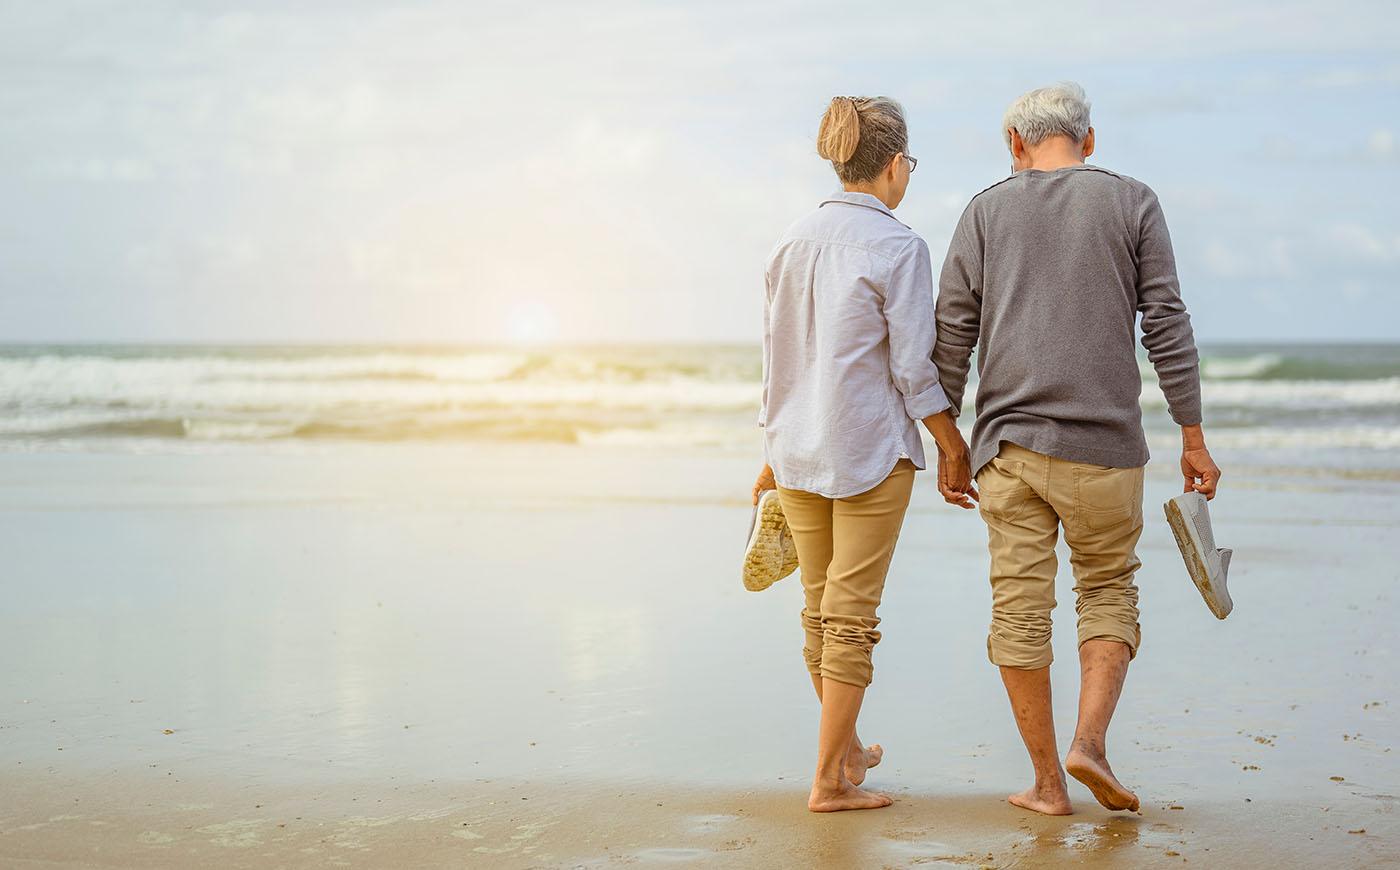 Old retired couple walking together hand-in-hand on the beach